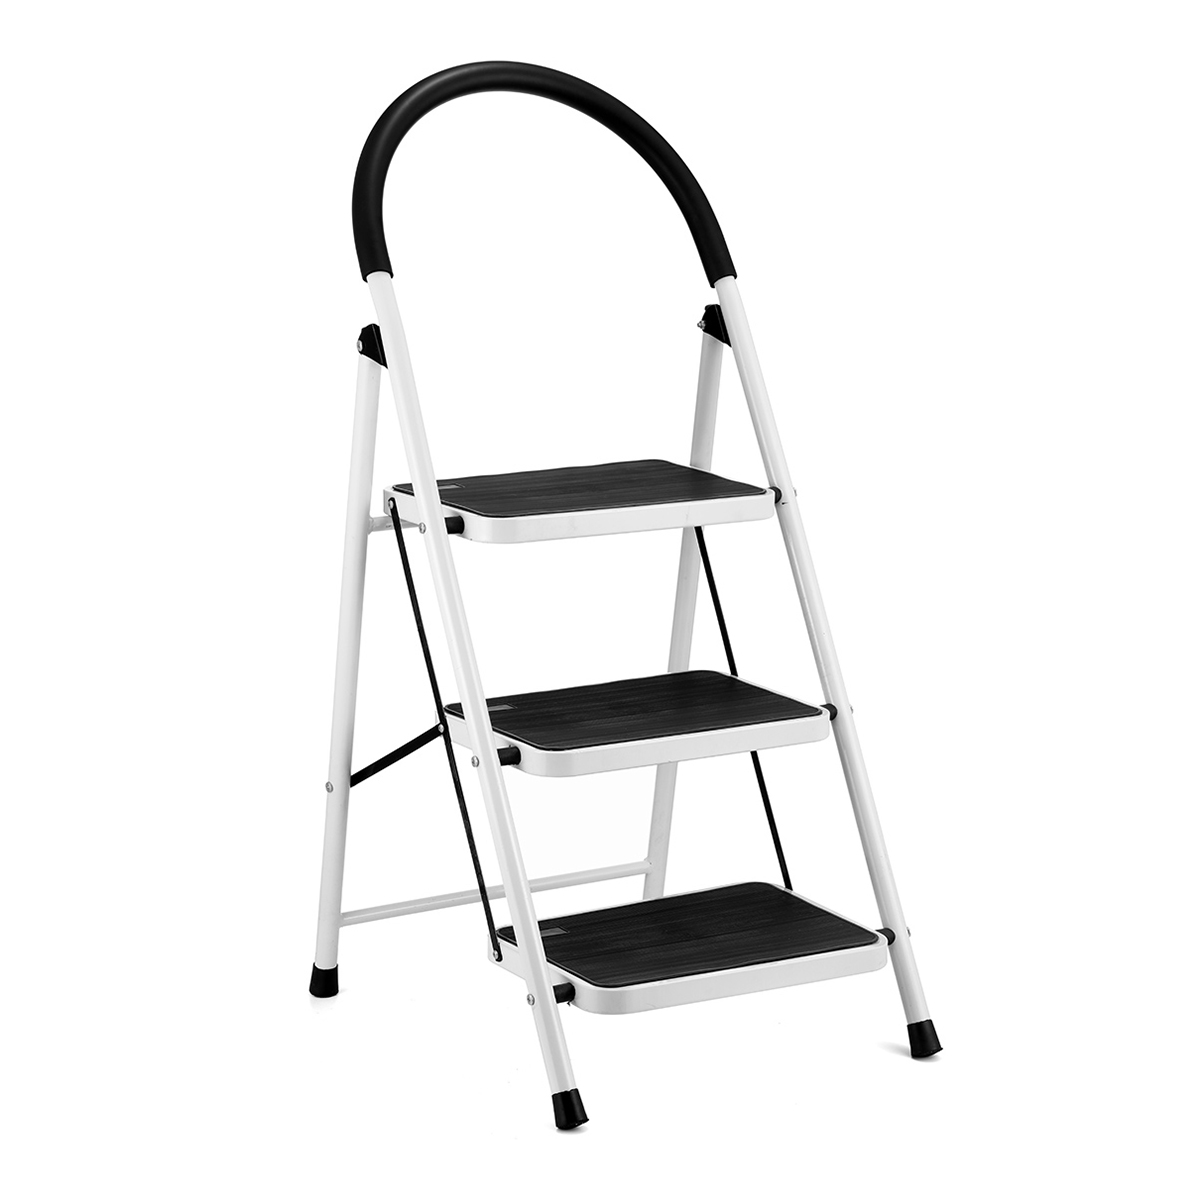 3 Step Ladder Folding Step Stool with Rubber Wide Anti-Slip Pedal Sturdy Steel Ladder Steel Ladder Hold Up to 350lbs for